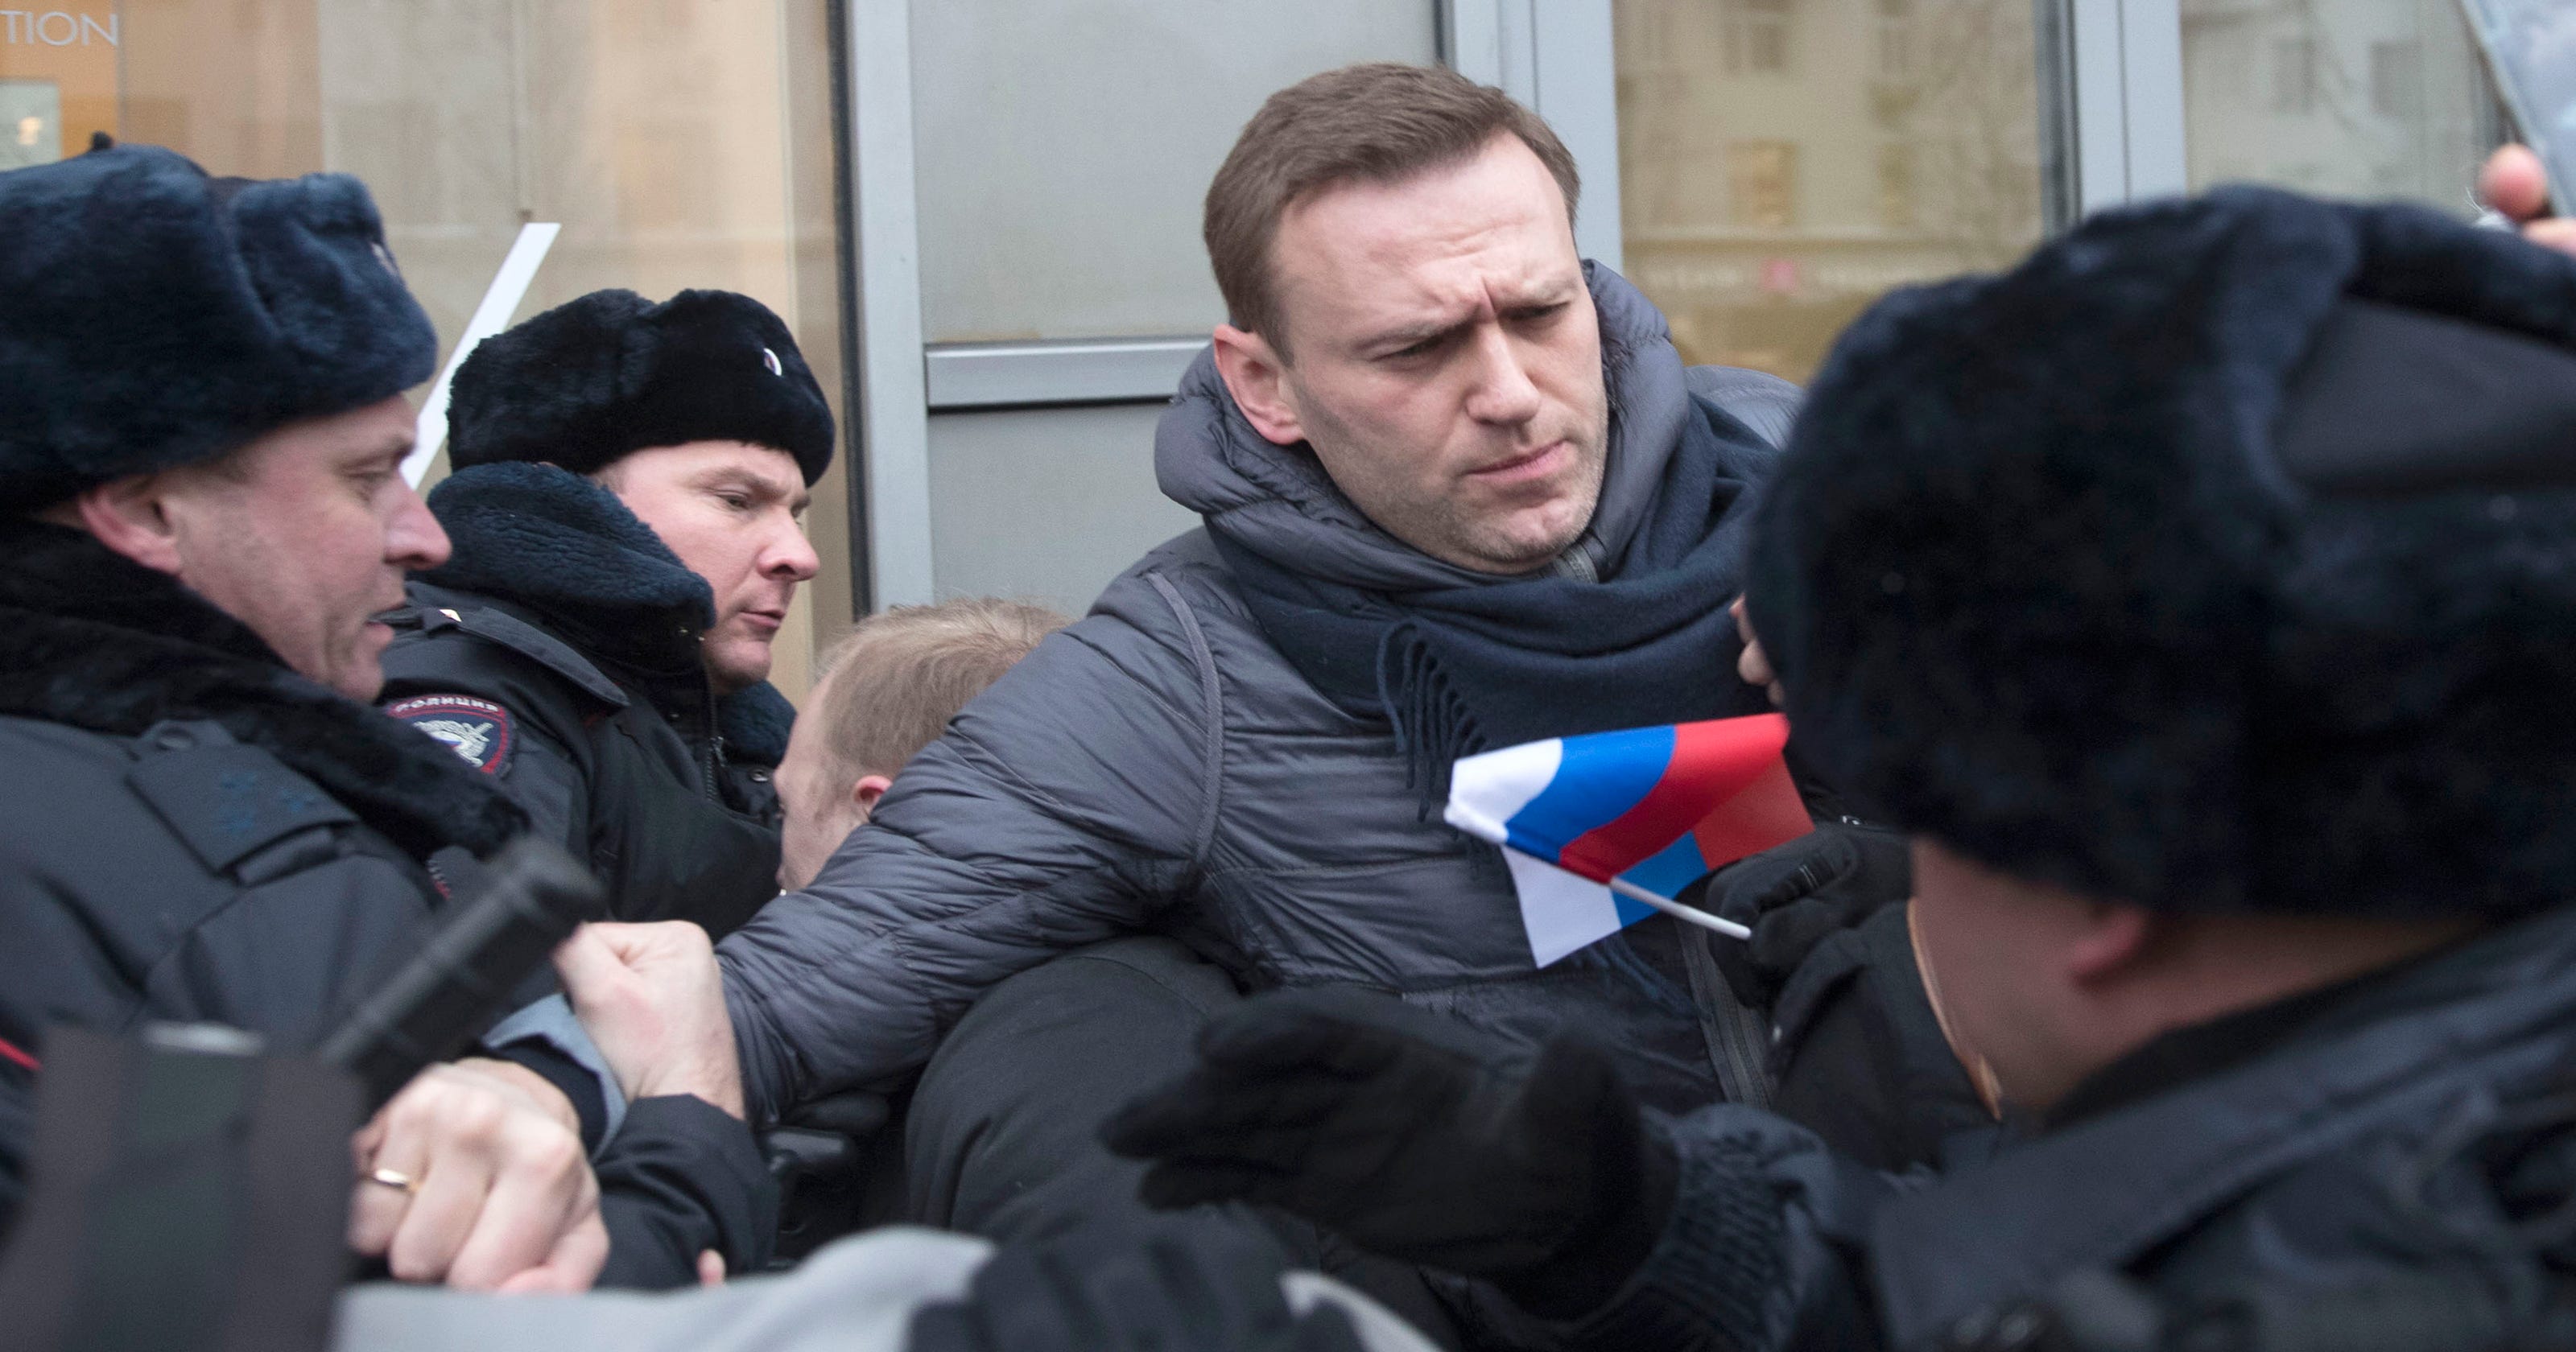 Alexei Navalny Russian Opposition Leader Arrested